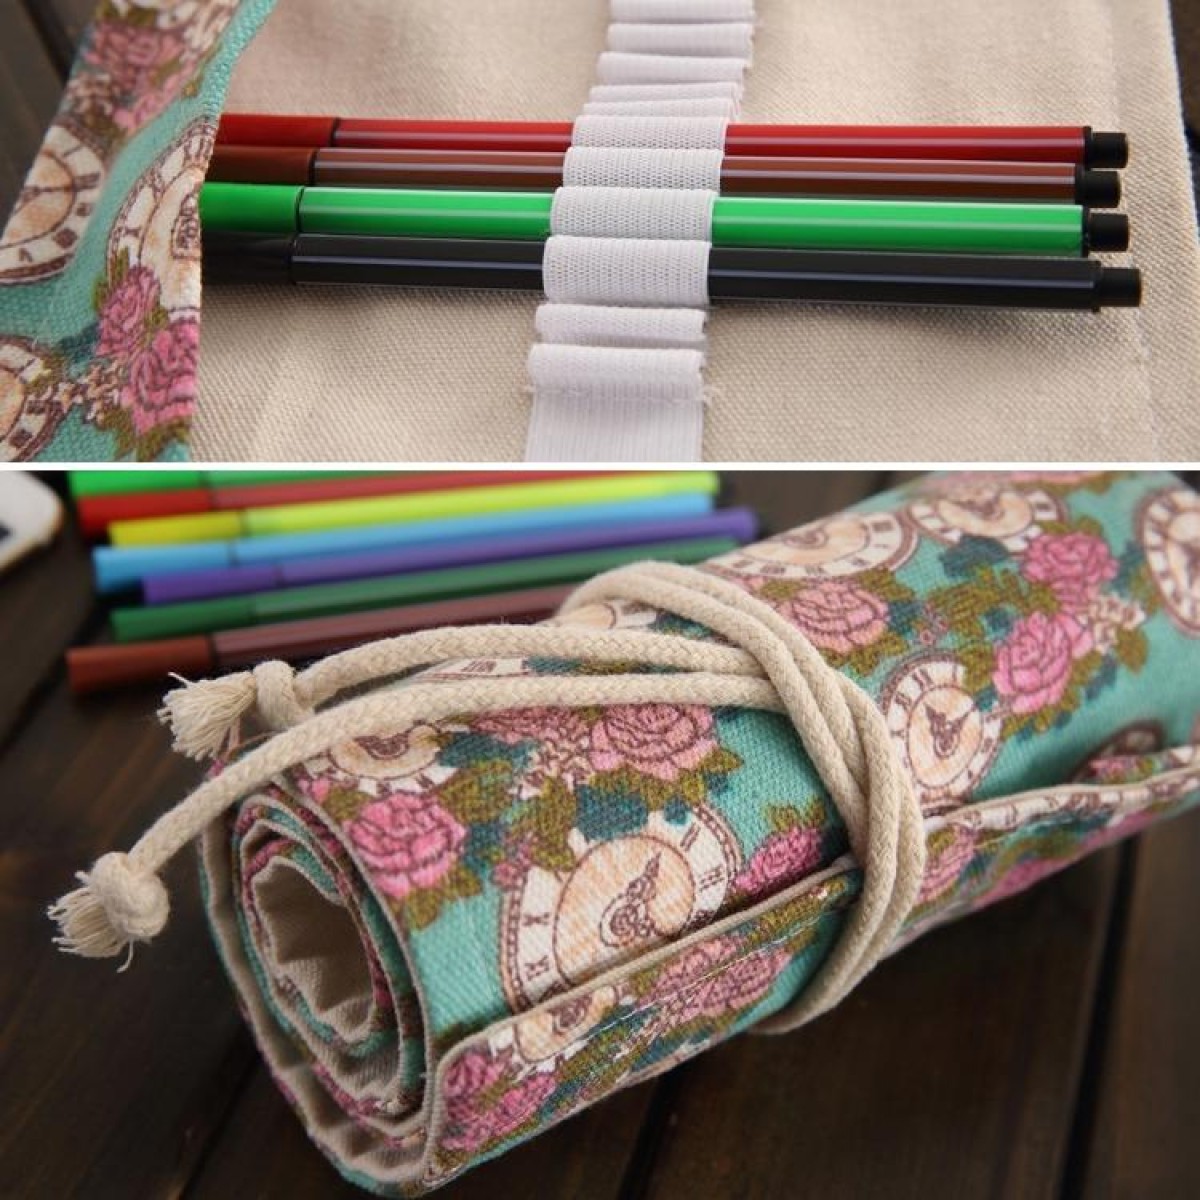 72 Slots Rose Clock Print Pen Bag Canvas Pencil Wrap Curtain Roll Up Pencil Case Stationery Pouch